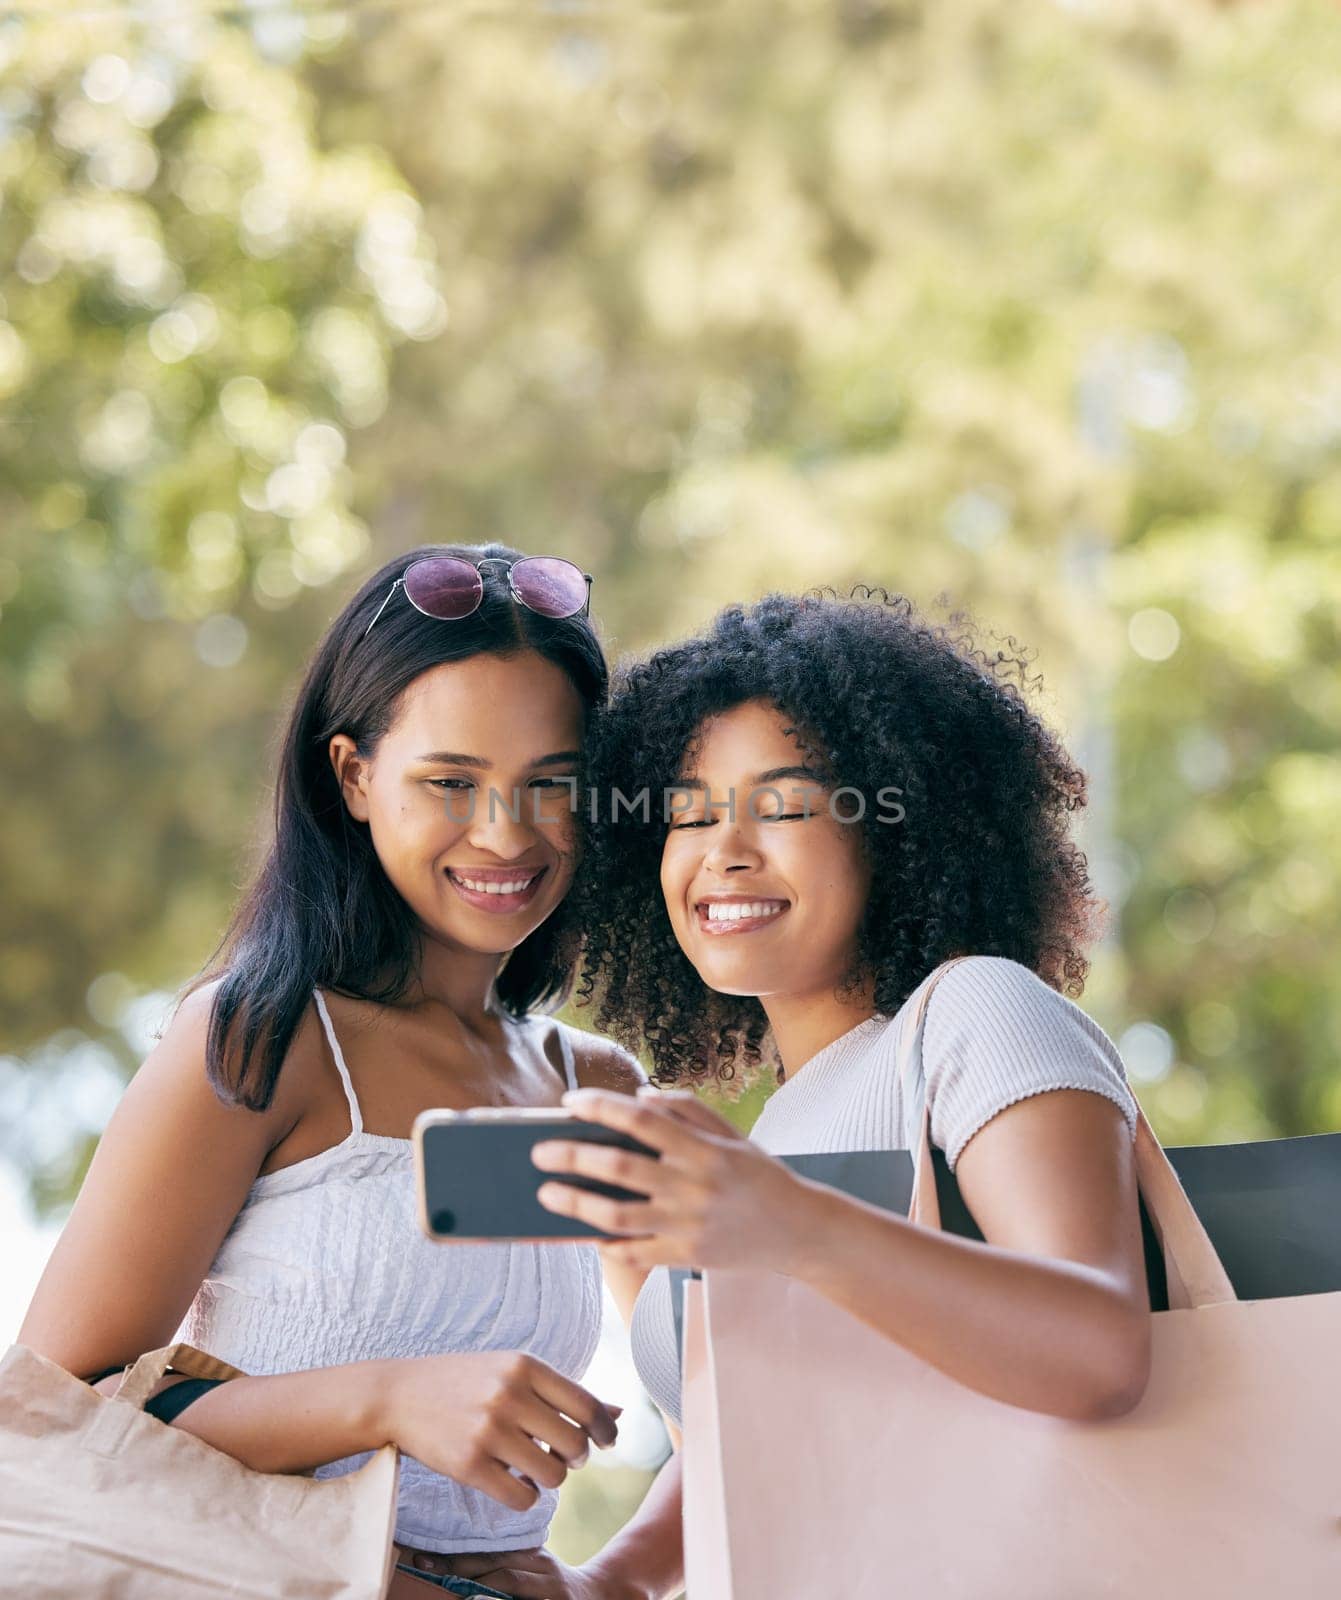 Friends, phone and selfie for retail shopping bonding moment together with smile for purchase choices. Black people, shopper and smartphone photograph of happy gen z women for social media